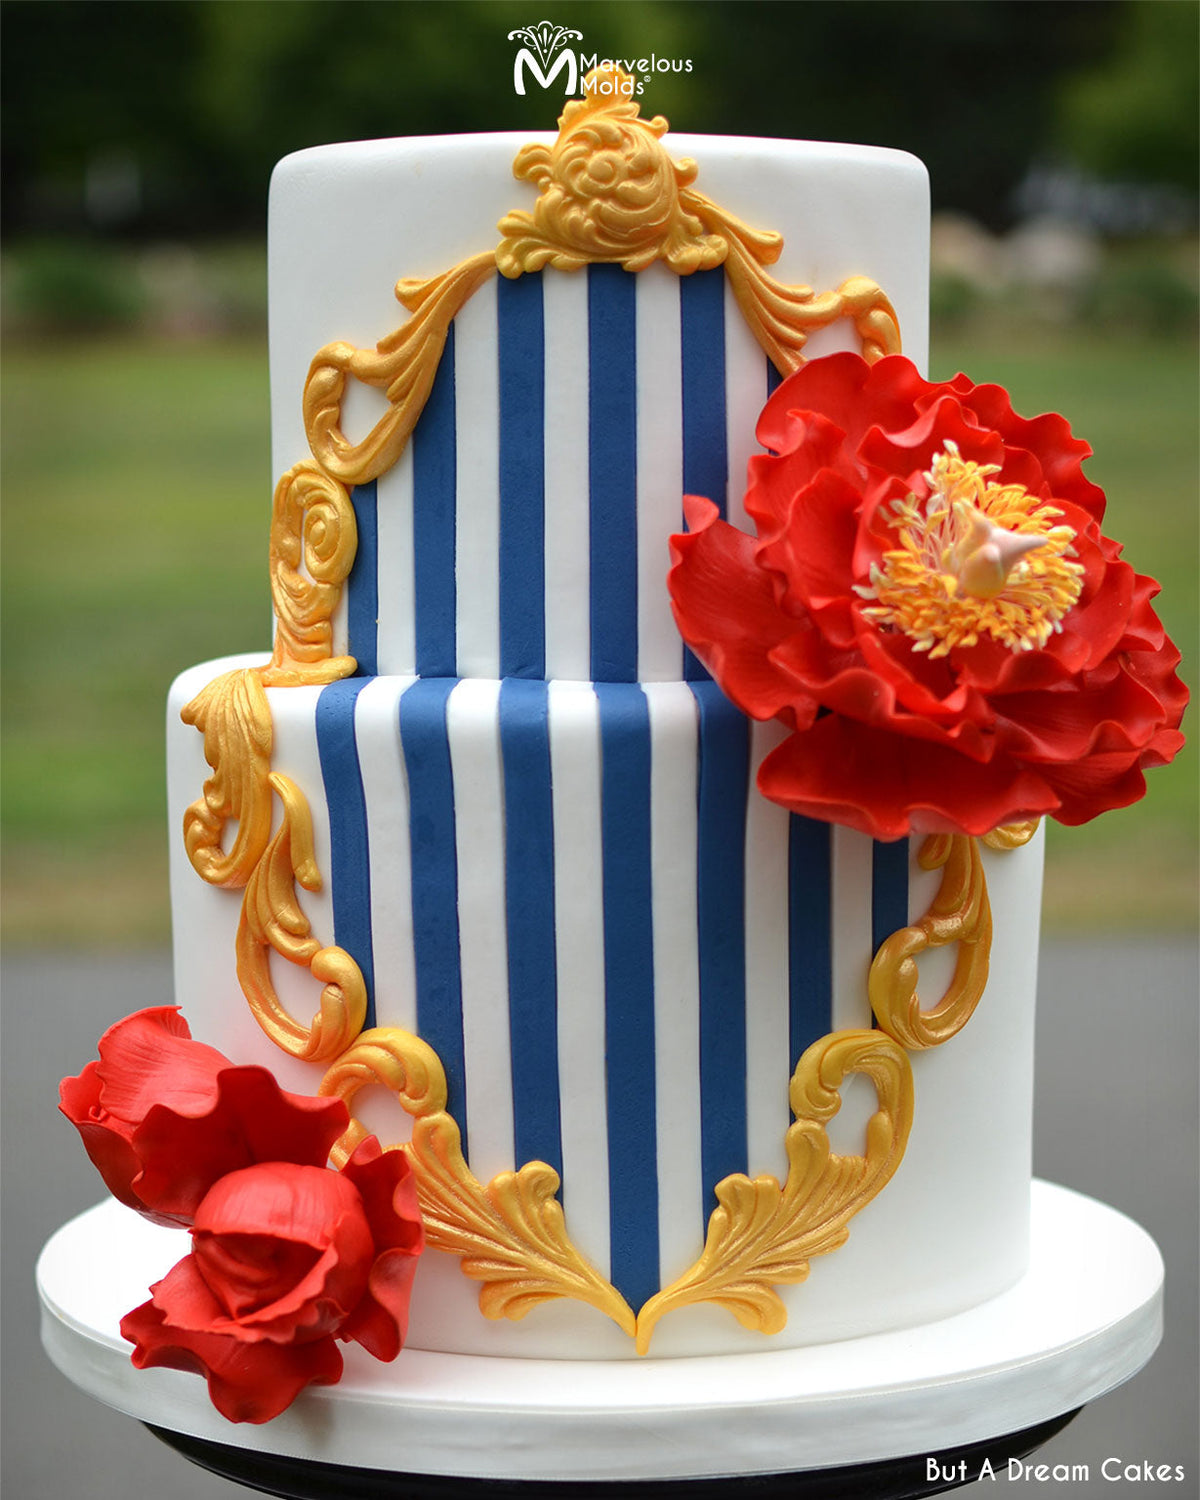 Blue and White Striped Cake Decorated with the Marvelous Molds Ornate Rosette Silicone Mold